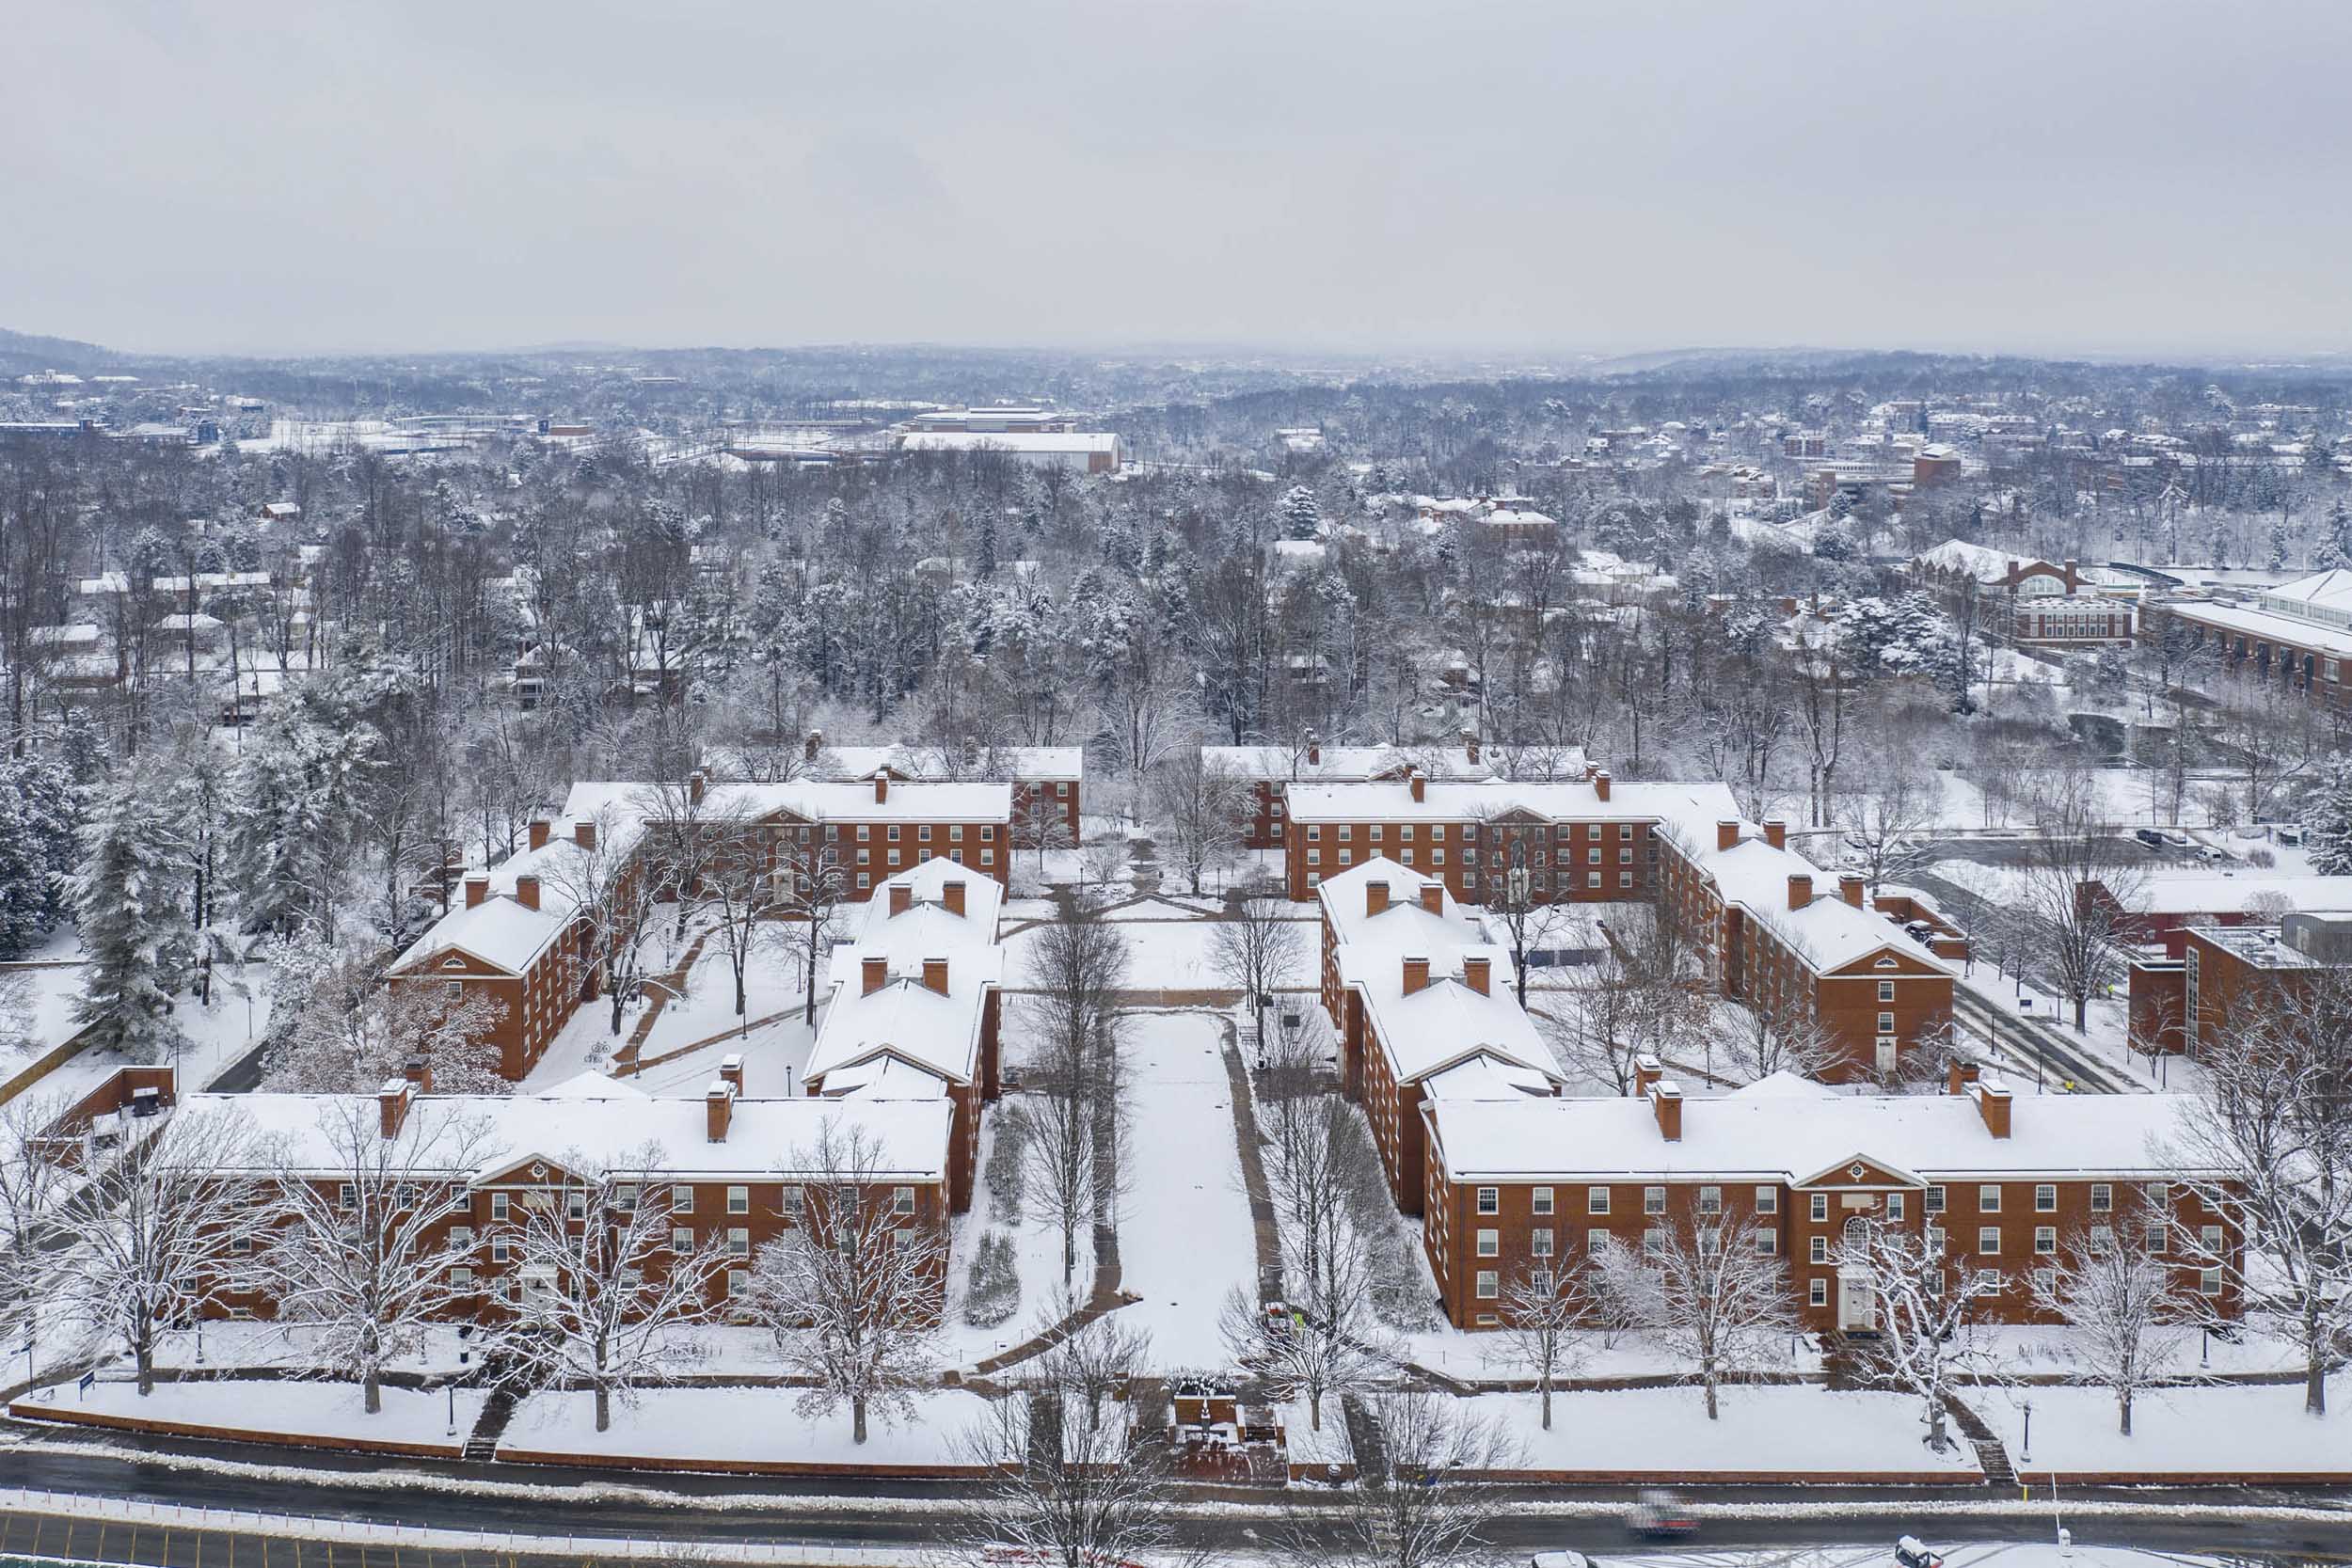 Arial view of UVA buildings in the snow